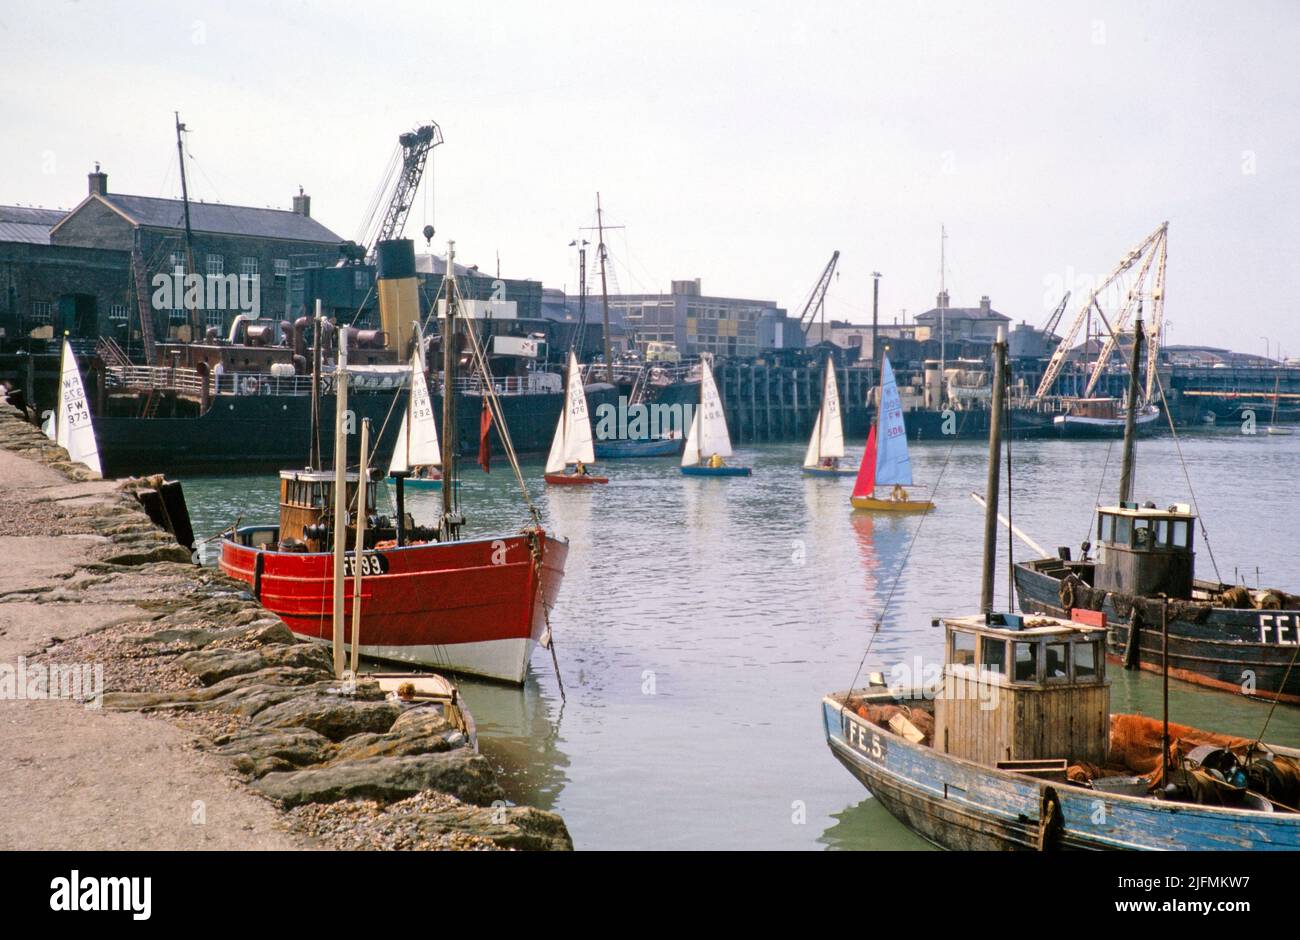 Boats in the harbour, Folkestone, Kent, England, UK early 1960s Stock Photo